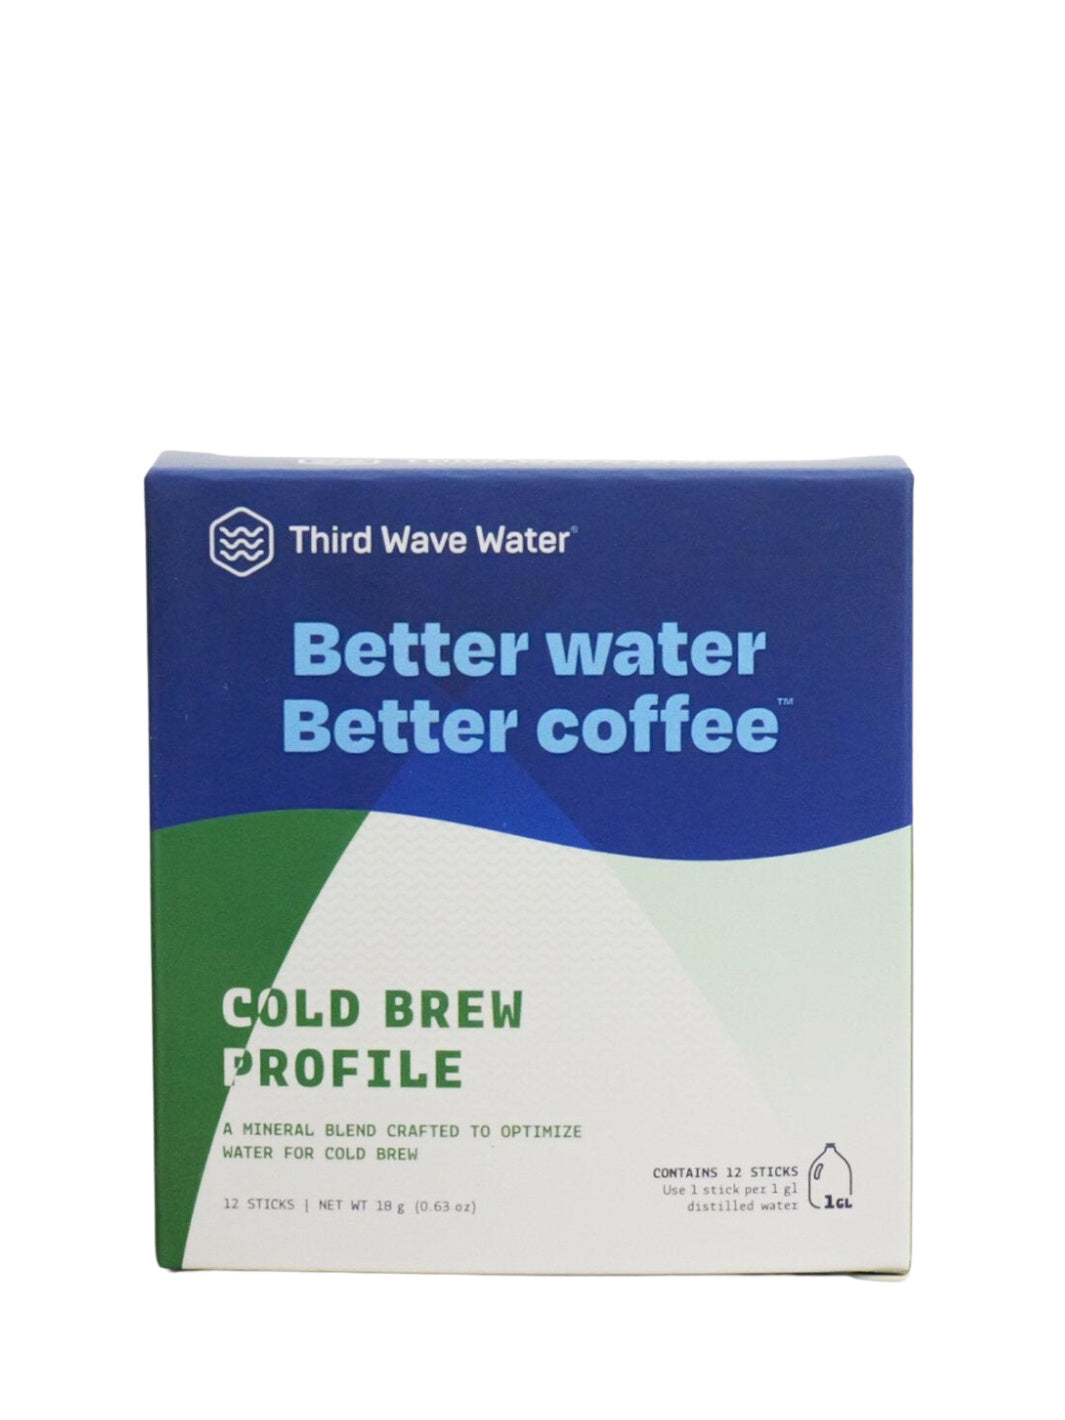 THIRD WAVE WATER Cold Brew Profile